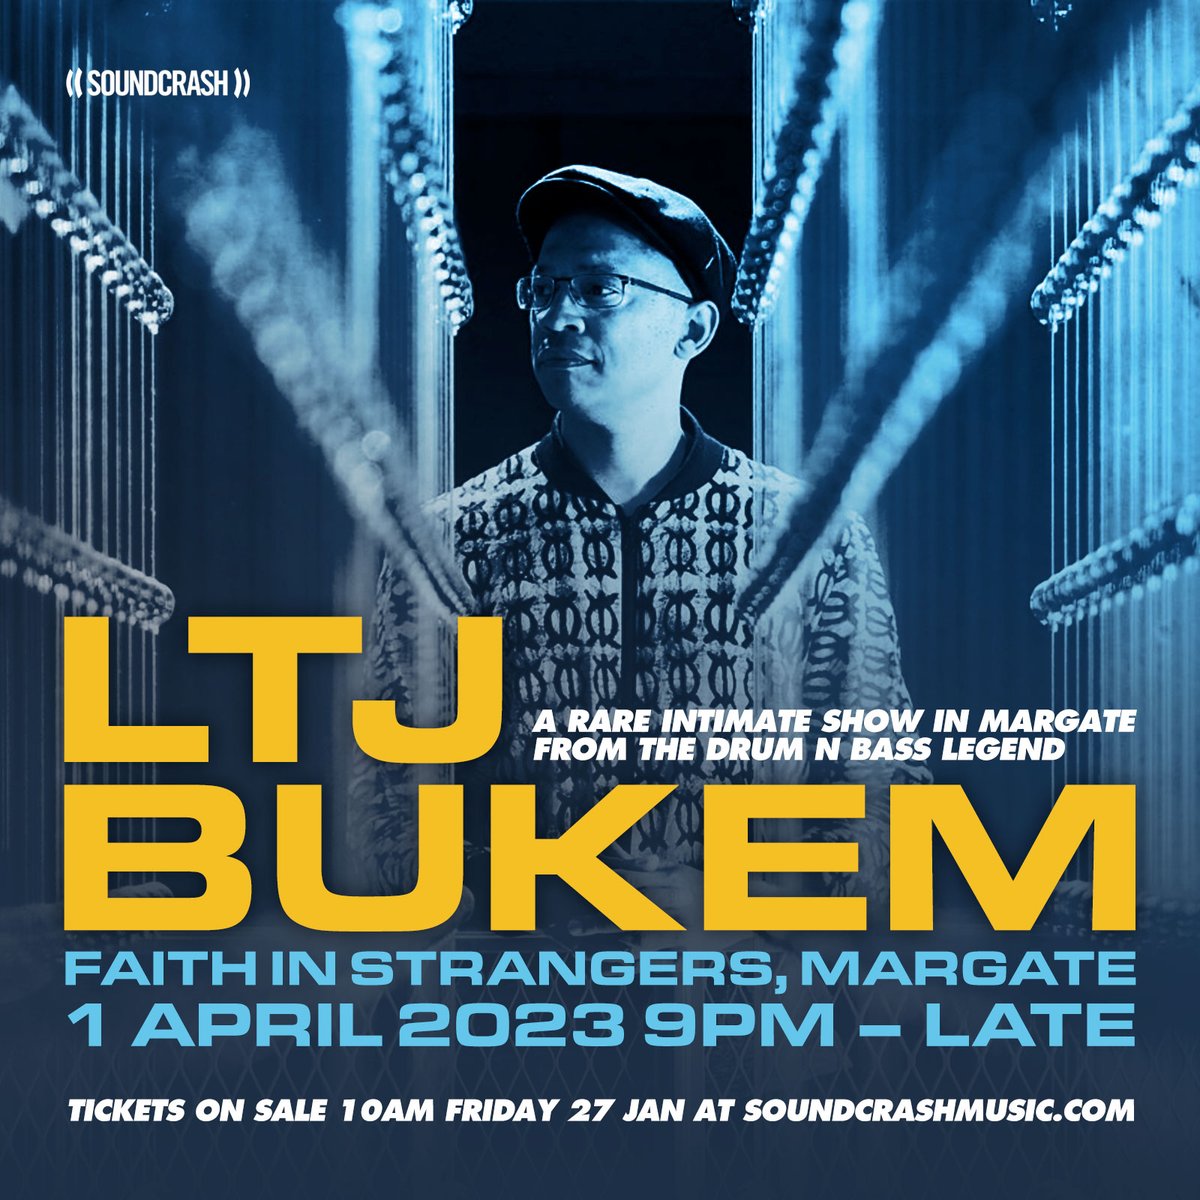 Renowned Drum & Bass Legend LTJ Bukem is performing a rare, intimate show at Faith In Strangers on April 1st. Tickets on sale Friday, January 27th at 11am. Bukem's unique sound, influenced by jazz fusion, has made him an innovator in the genre. Don't miss out!